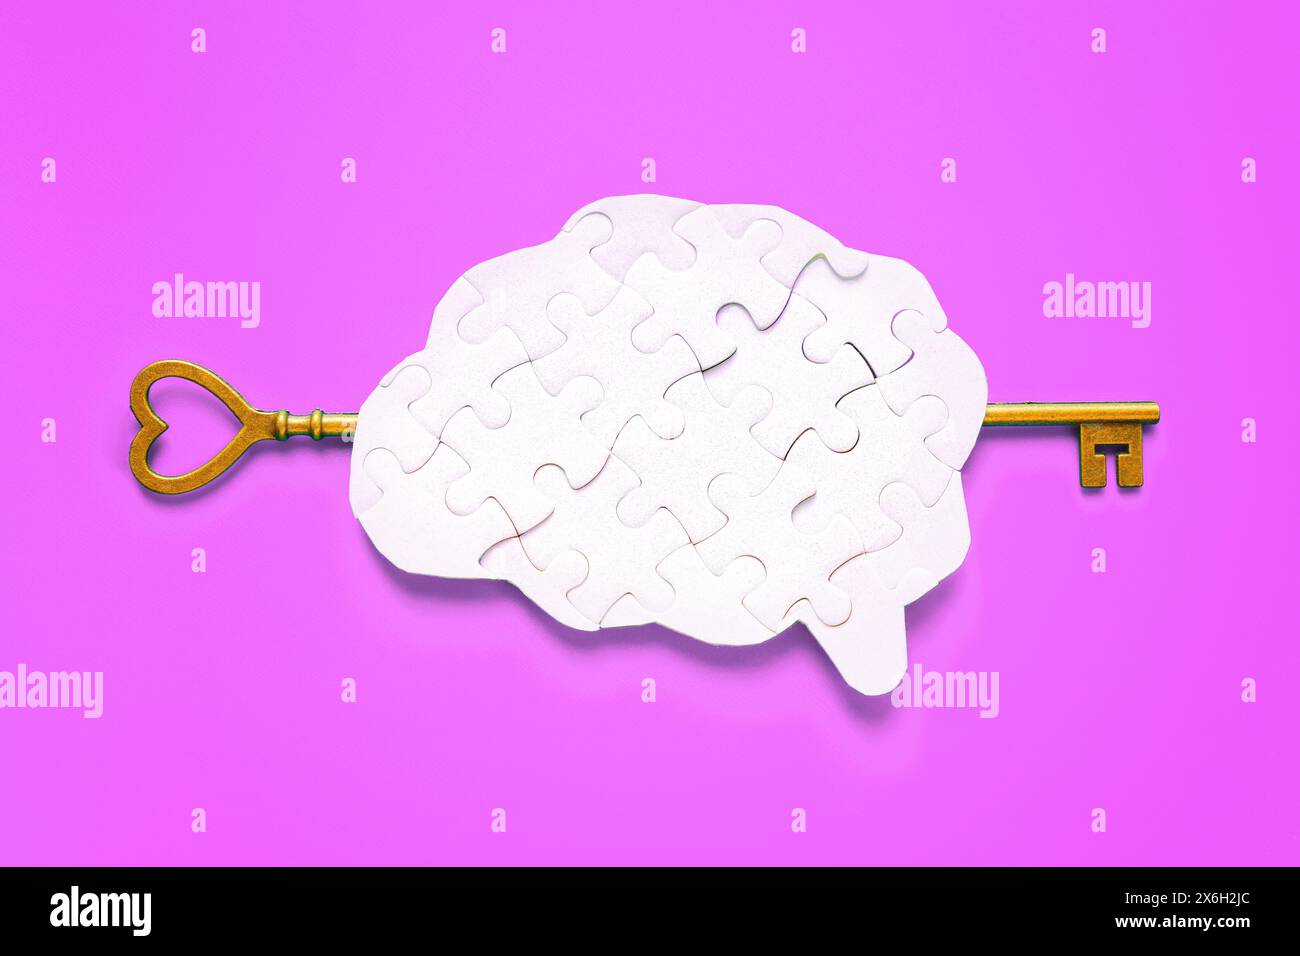 Long key gracefully inserted into a human brain-shaped puzzle, against a soft purple background. Unlocking of brilliance and intellect. Stock Photo